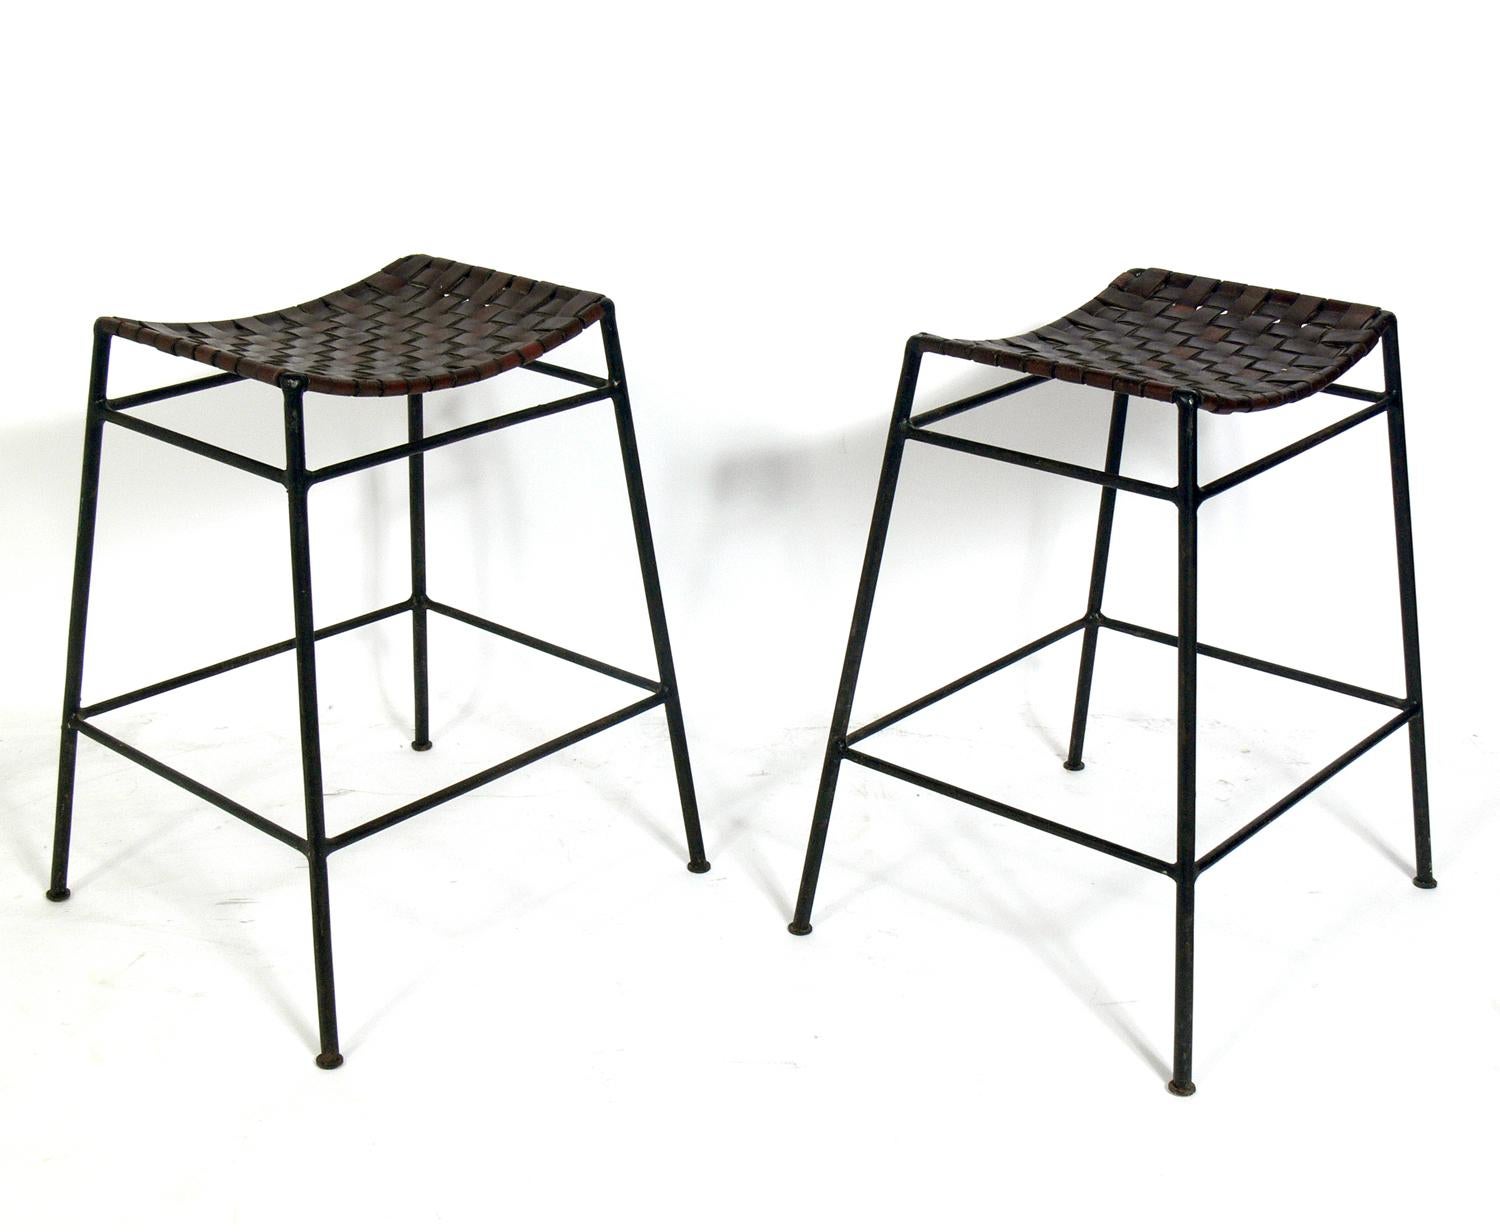 Pair of woven leather and iron bar stools, in the manner of Lila Swift and Donald Monell, believed to be circa 1980s. Wonderful original patina to the woven leather seats and iron frames.